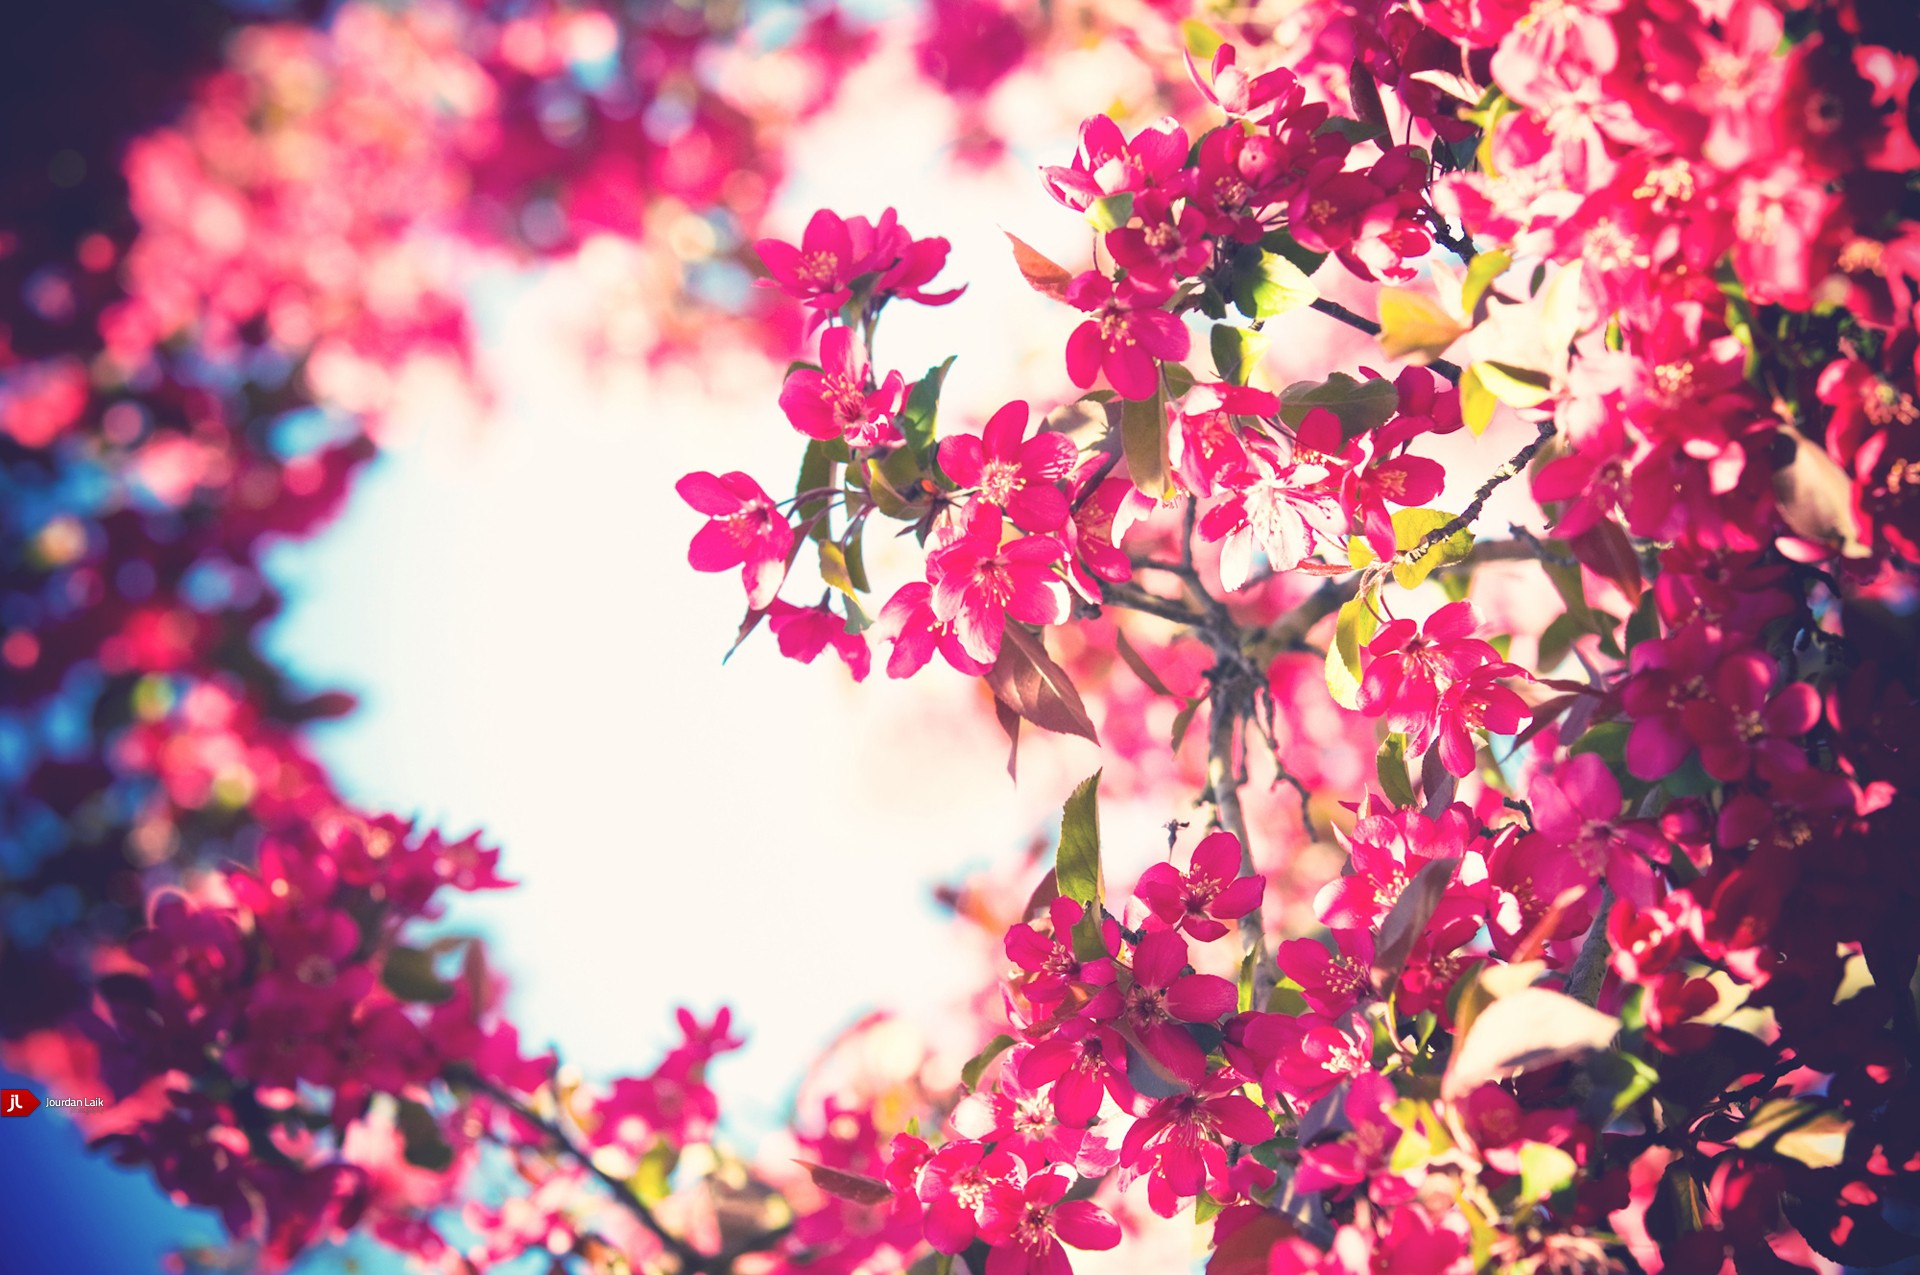 Flowers, Beautiful, And Pink Image - Flower Blooming - HD Wallpaper 